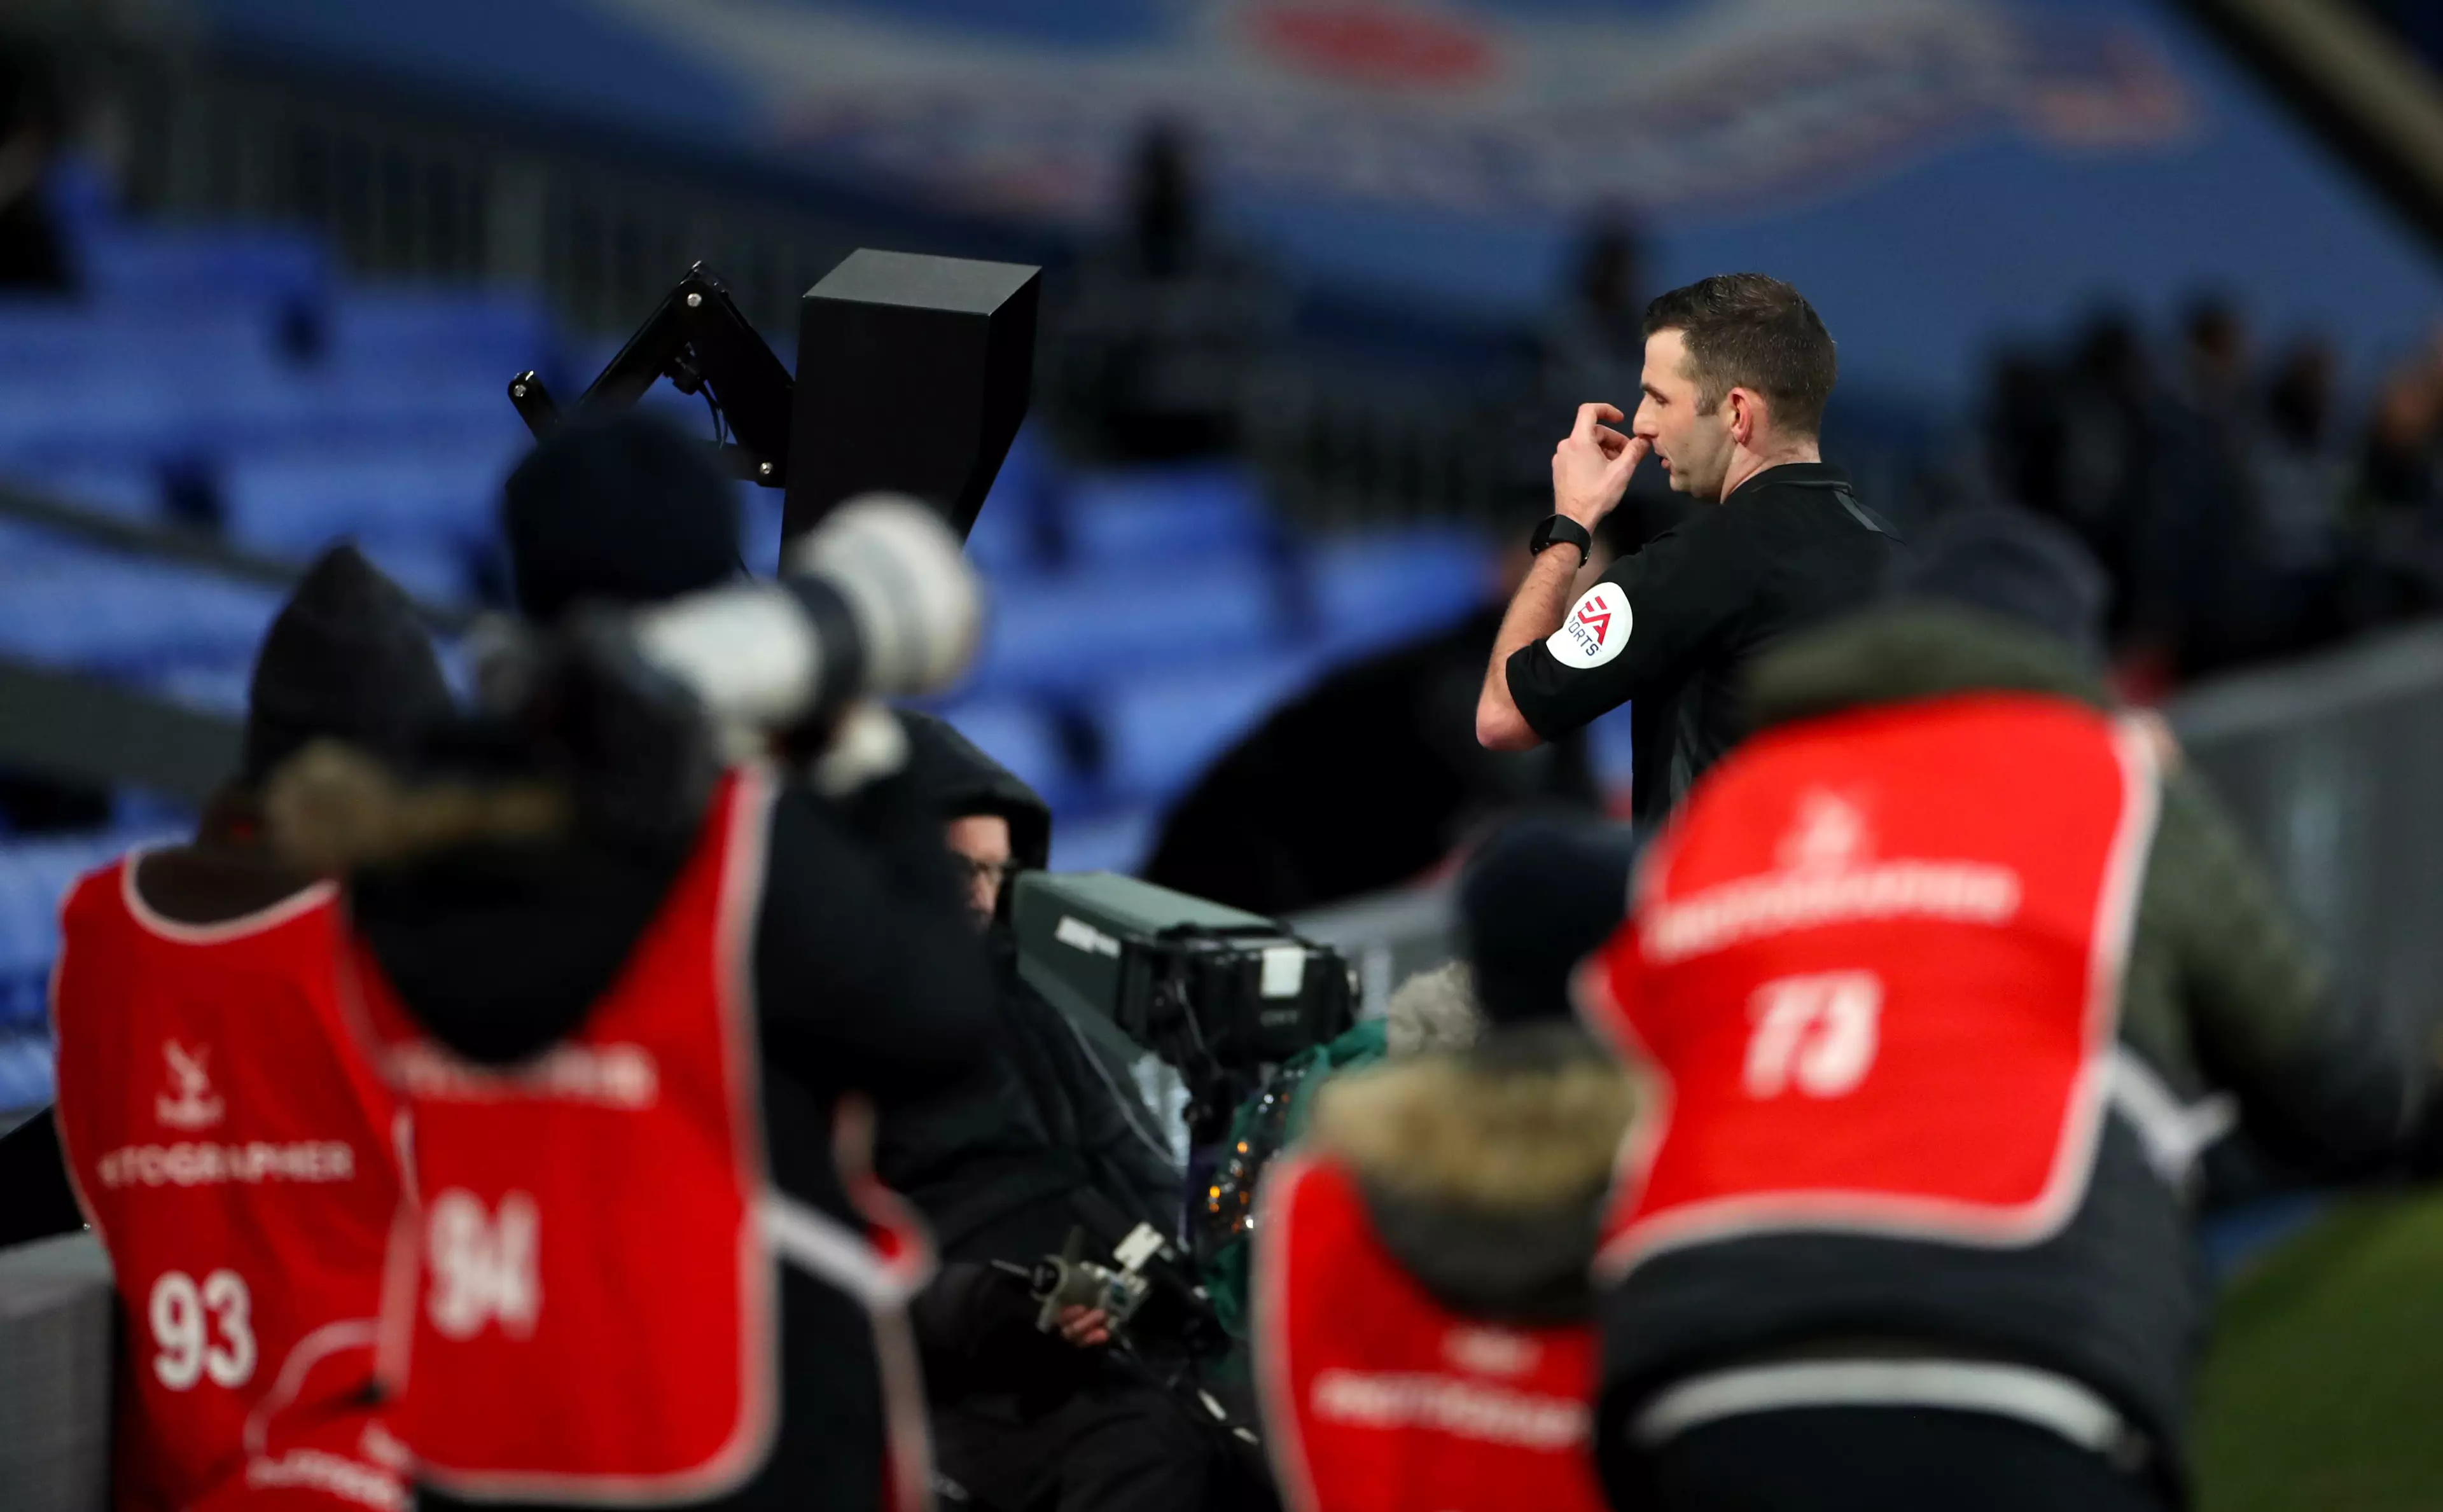 Michael Oliver checks the screen. Image: PA Images